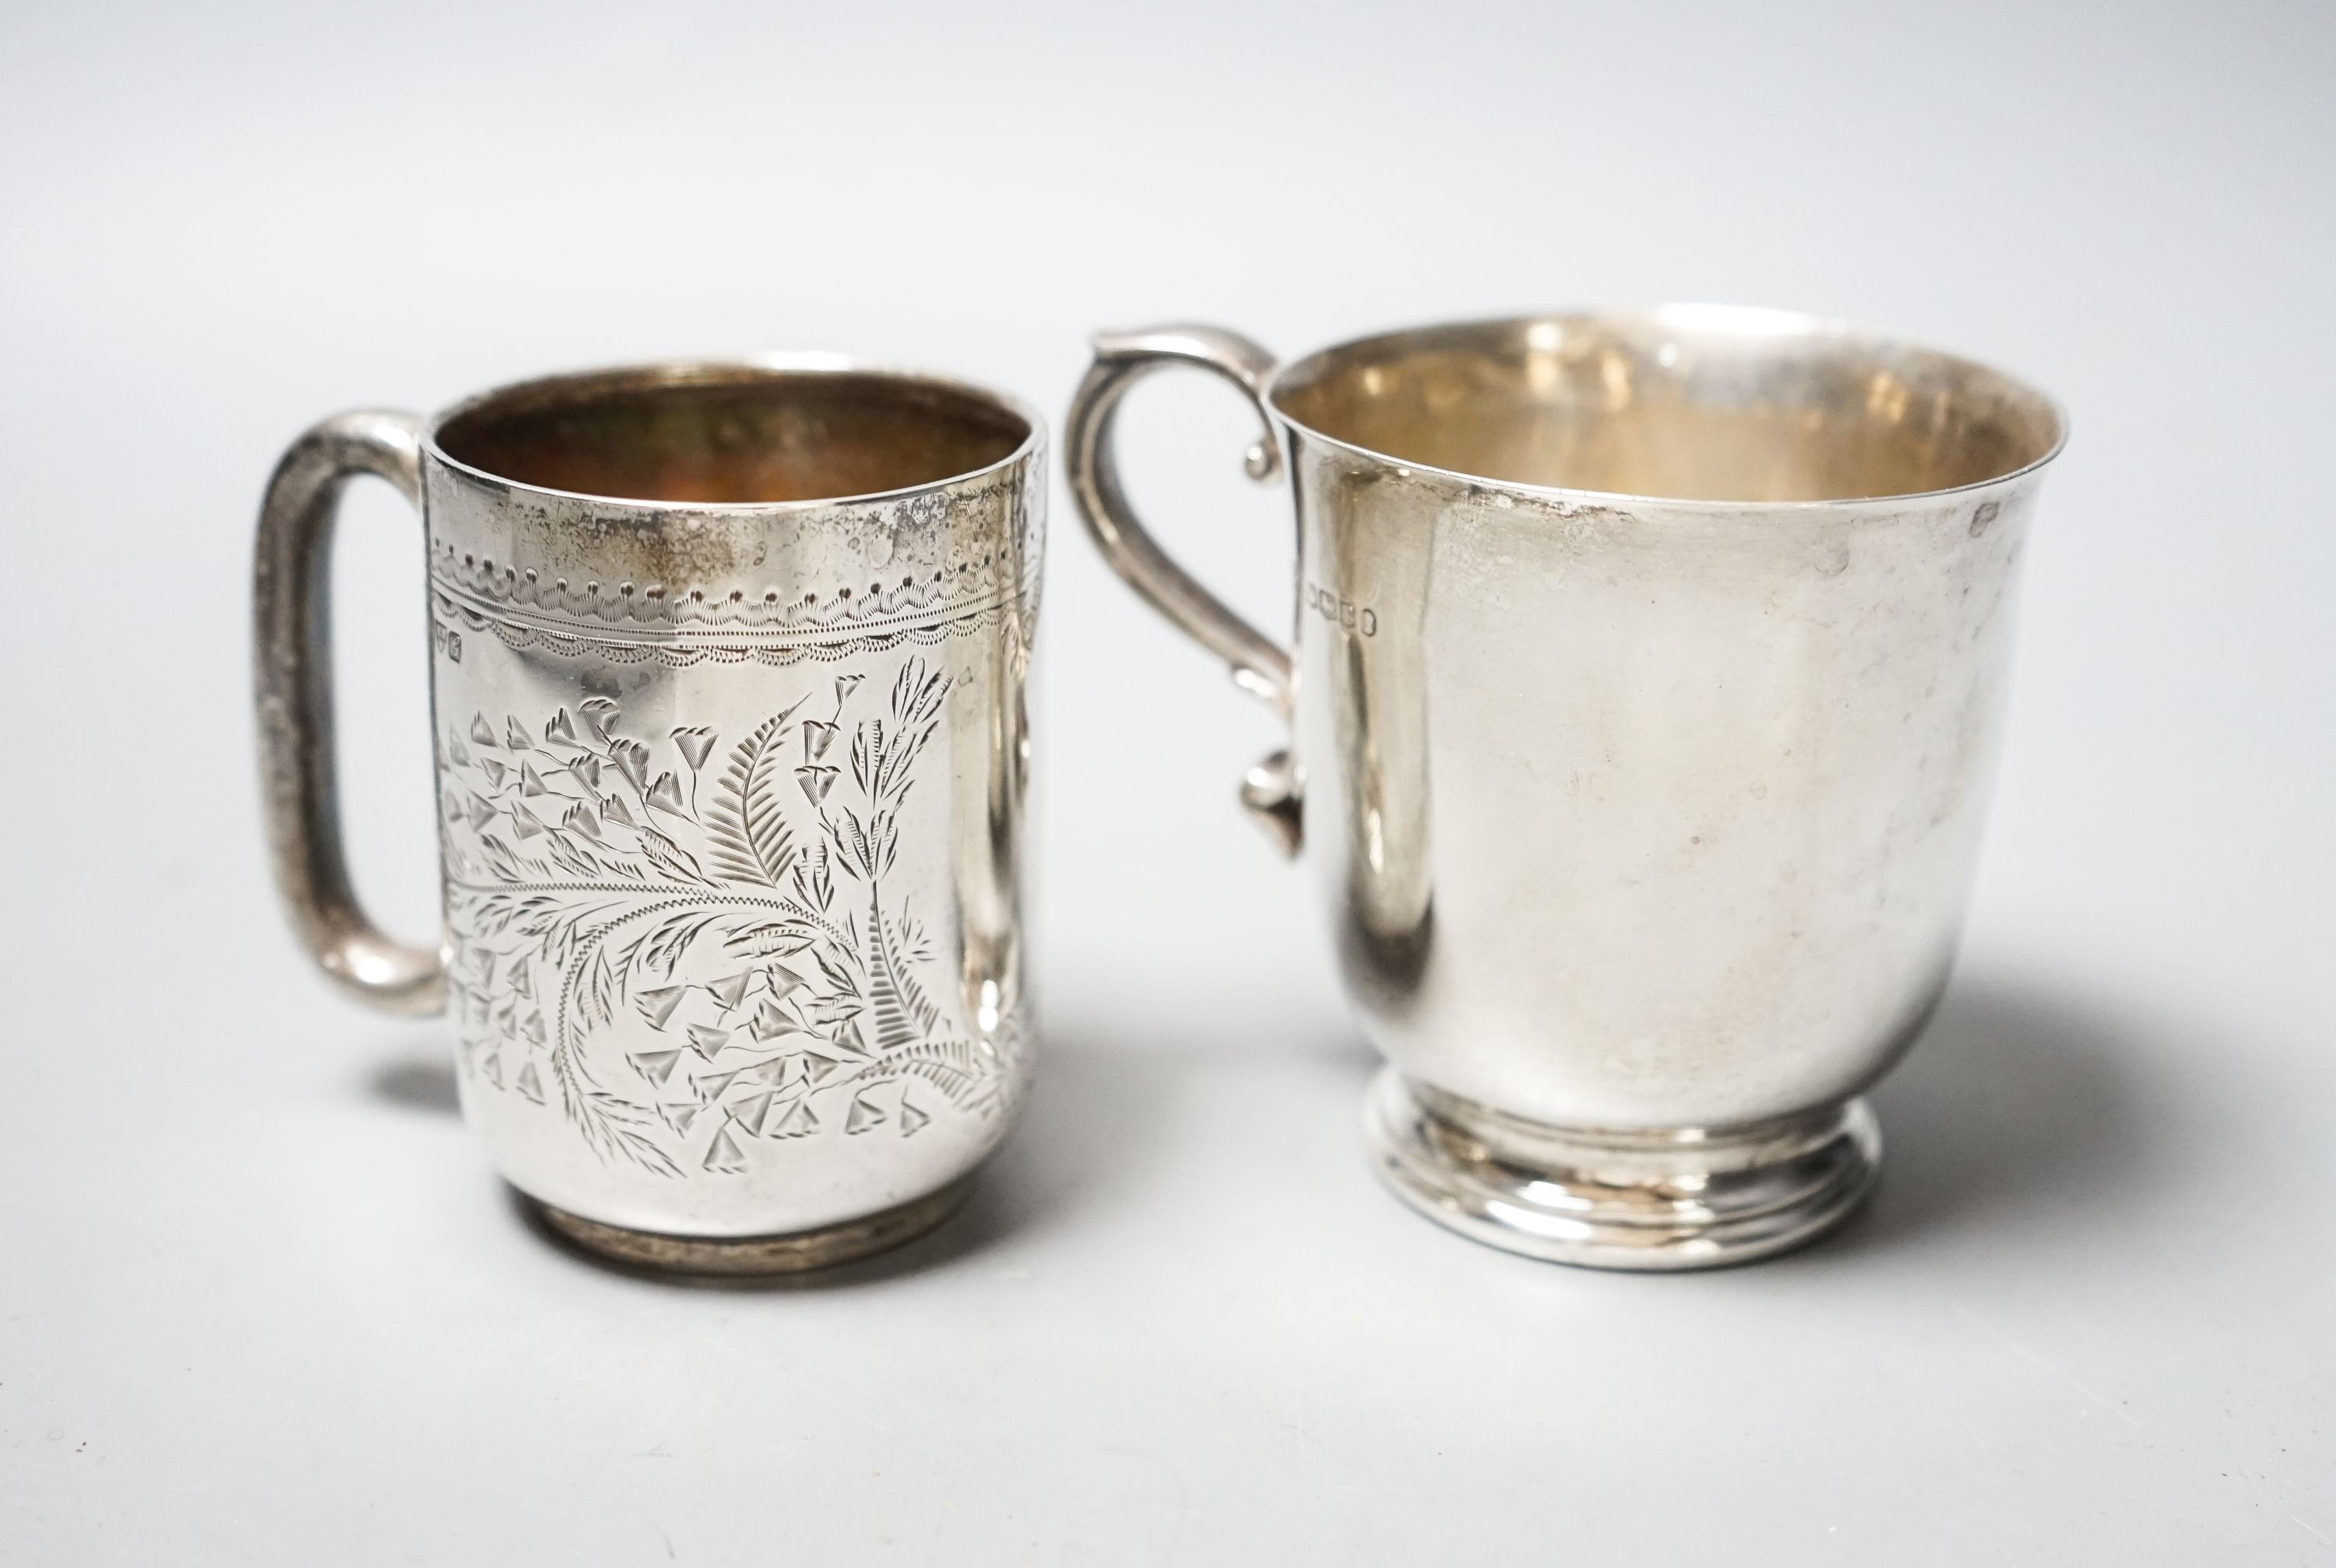 An Edwardian engraved silver christening mug, Chester, 1906, 73mm and a later silver mug, 6.5oz.